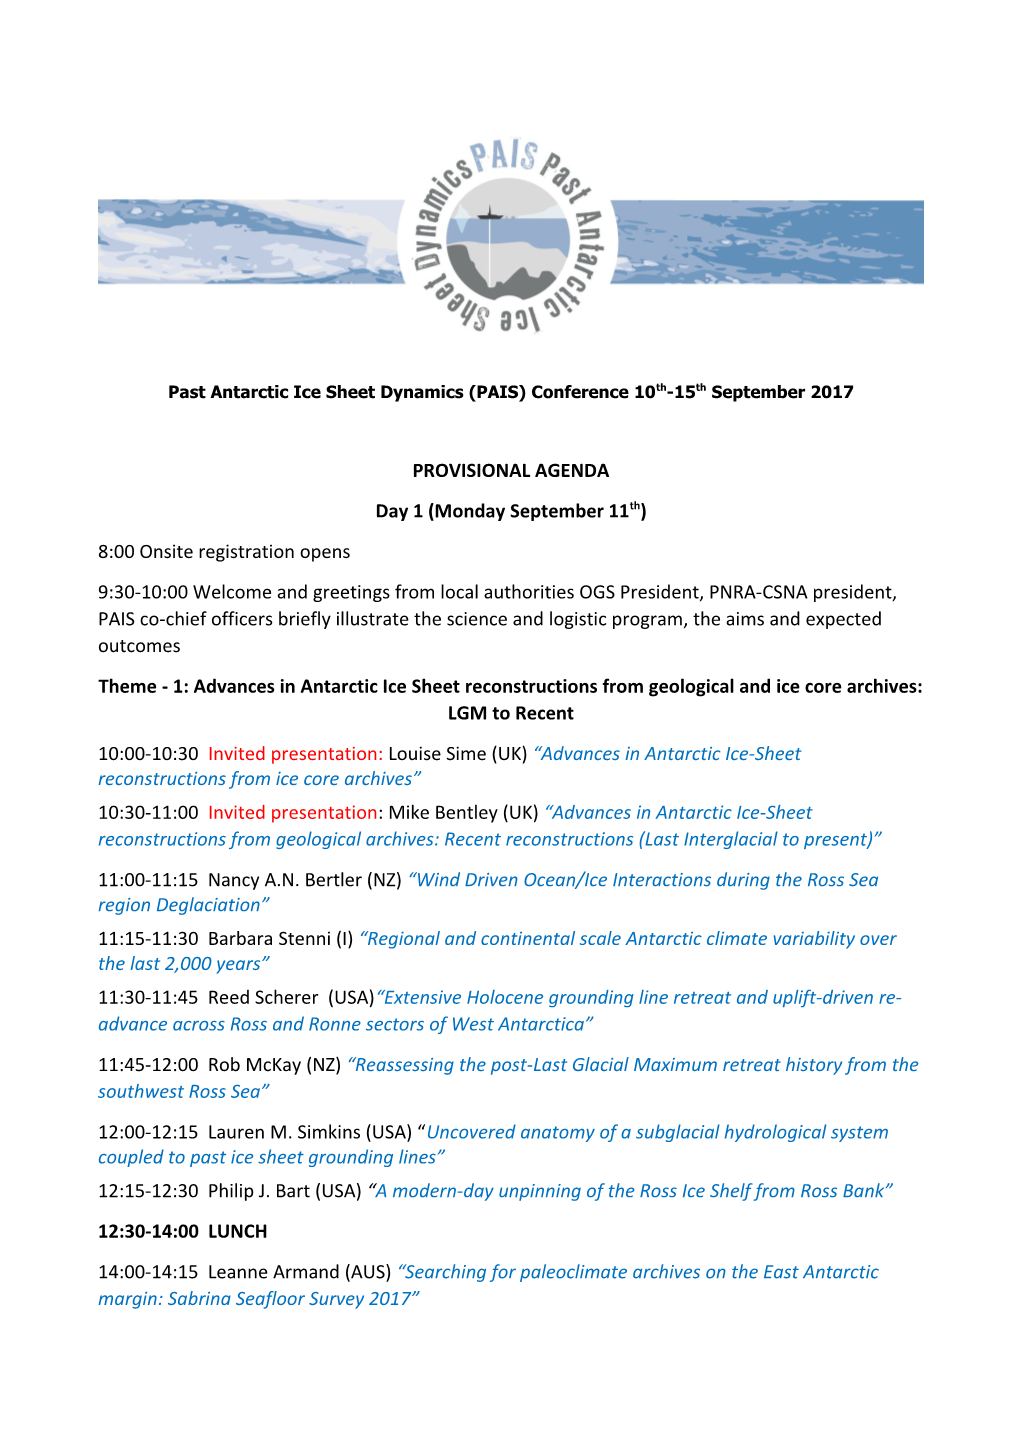 Past Antarctic Ice Sheet Dynamics (PAIS) Conference 10Th-15Th September 2017